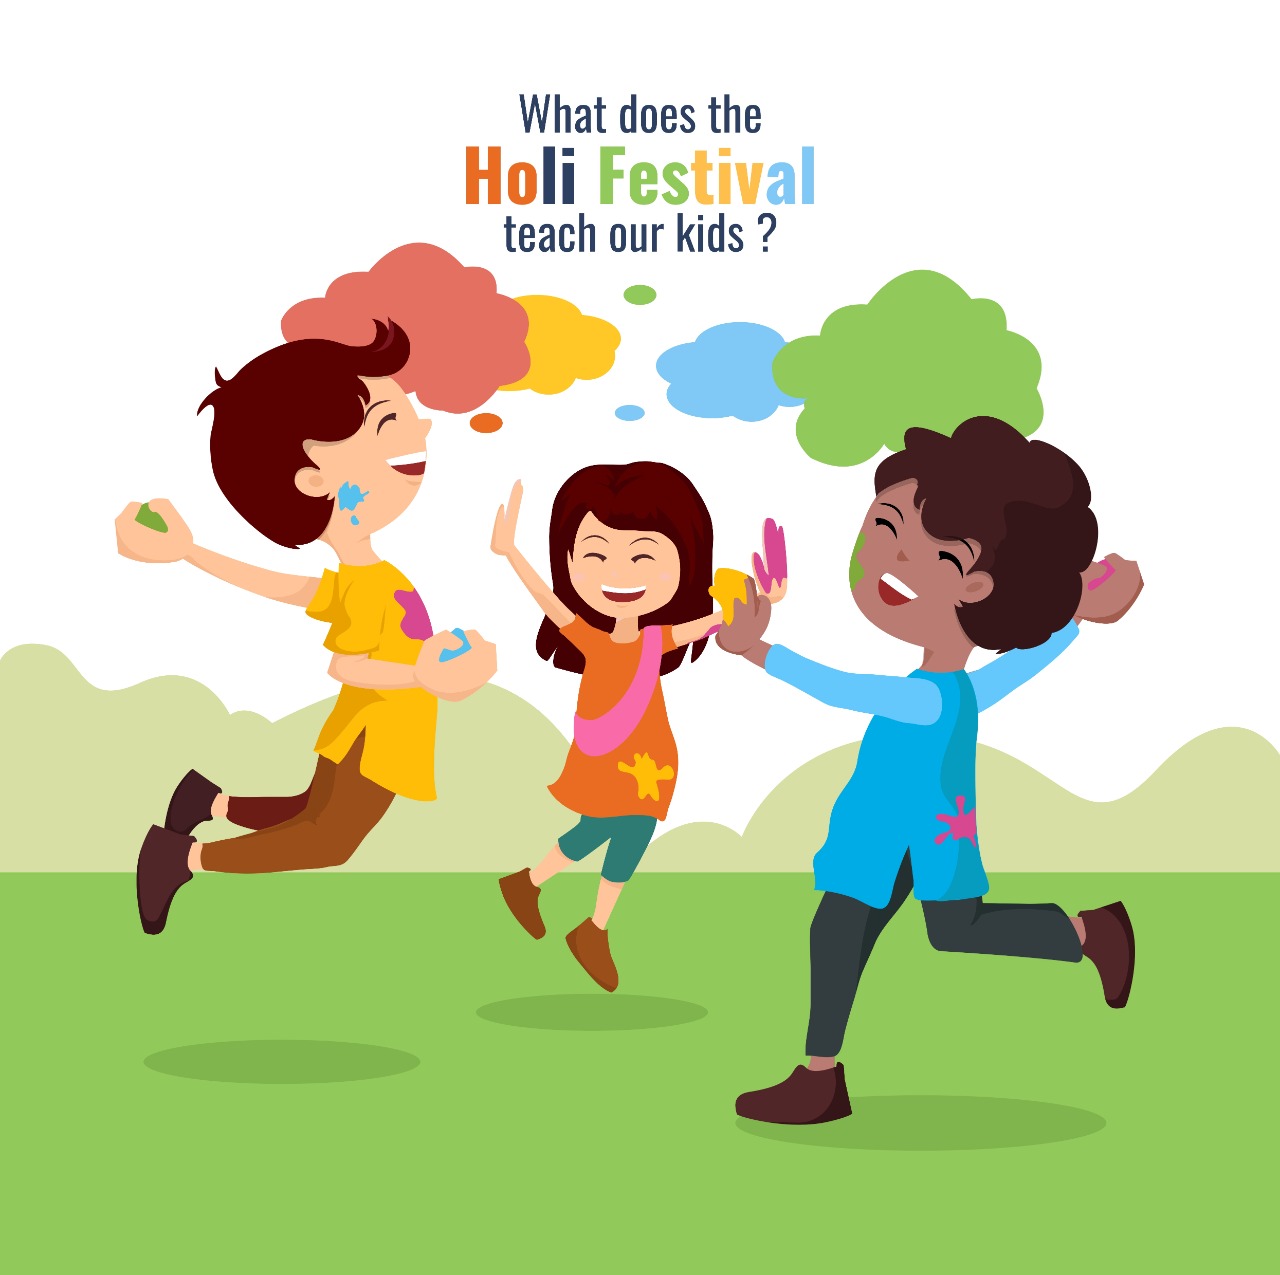 What Does The Festival Of Holi Teach Our Kids?